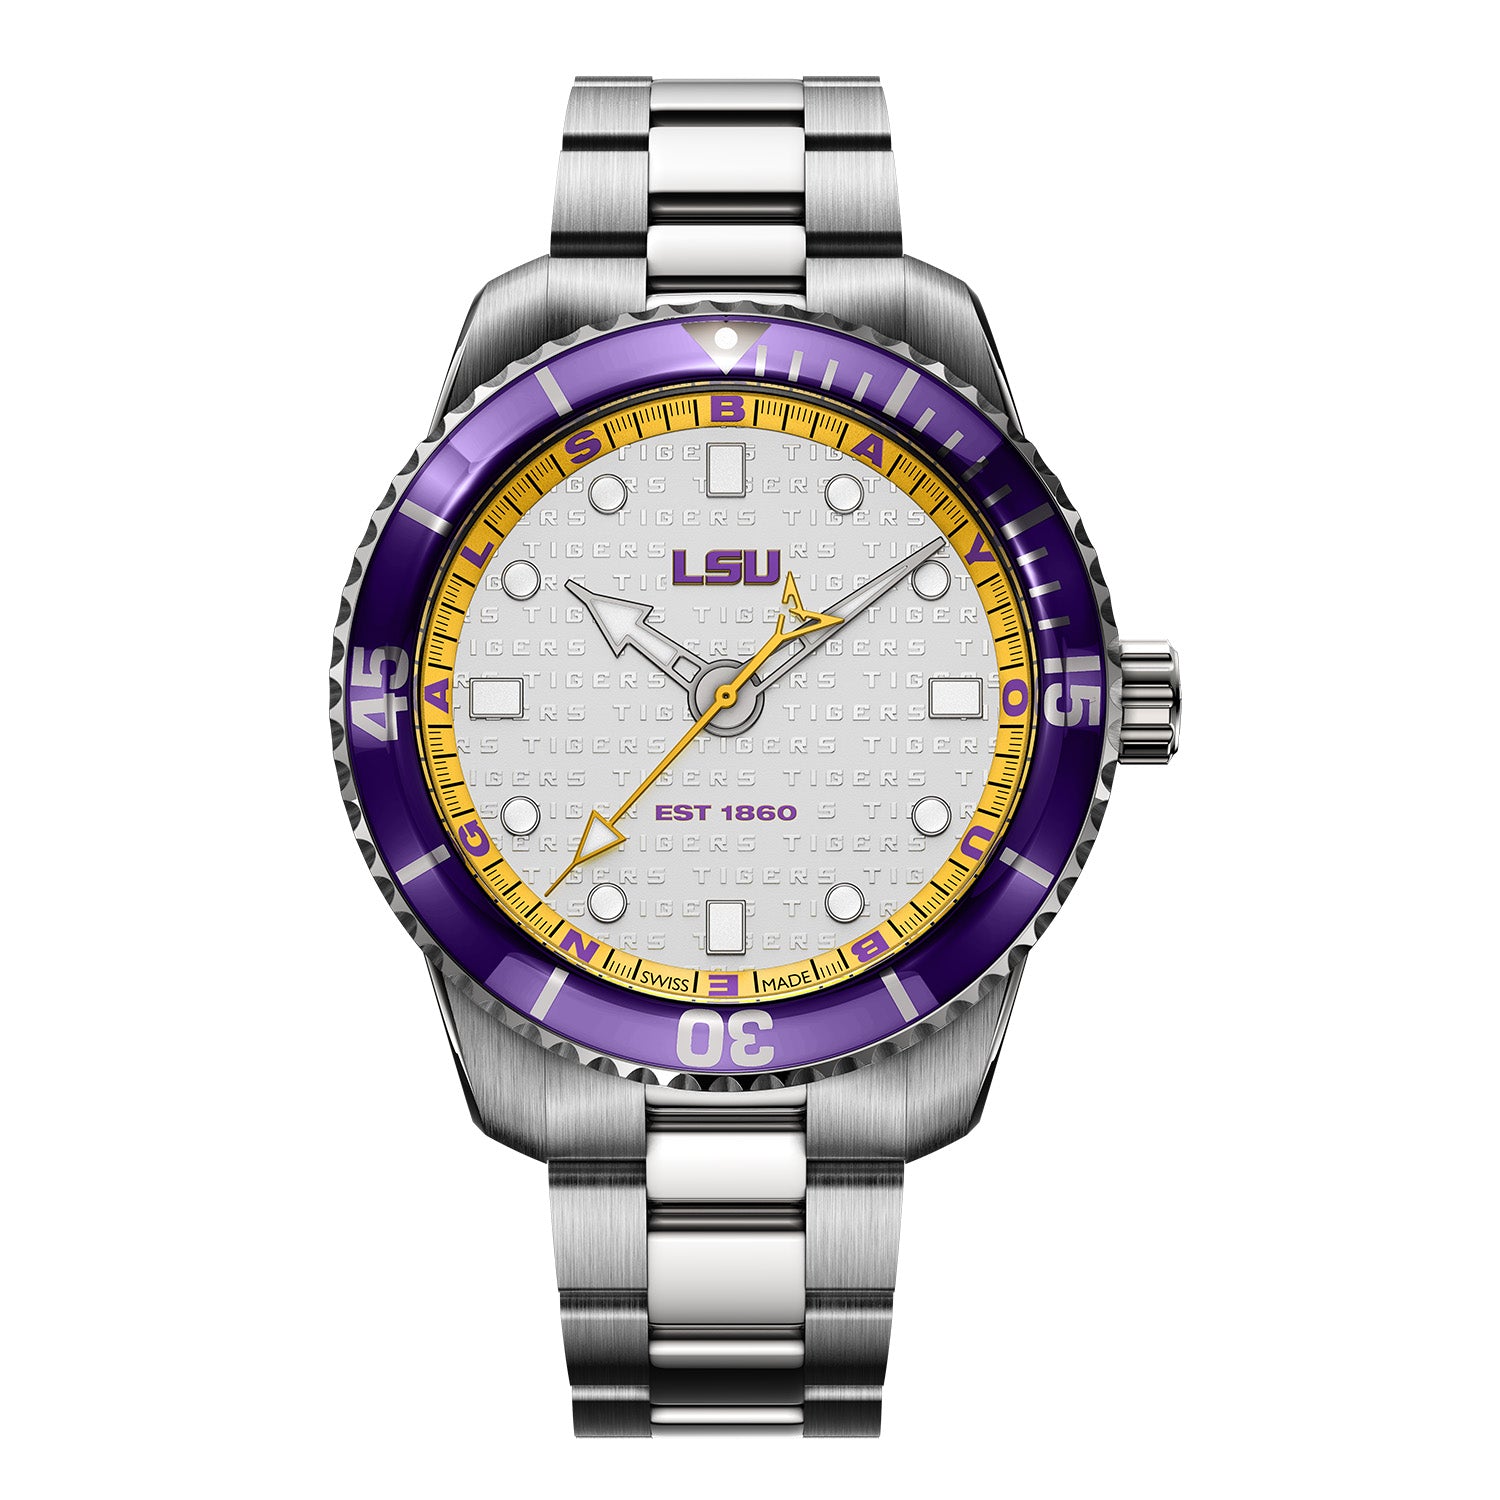 LSU Swiss made automatic watch. Front view.